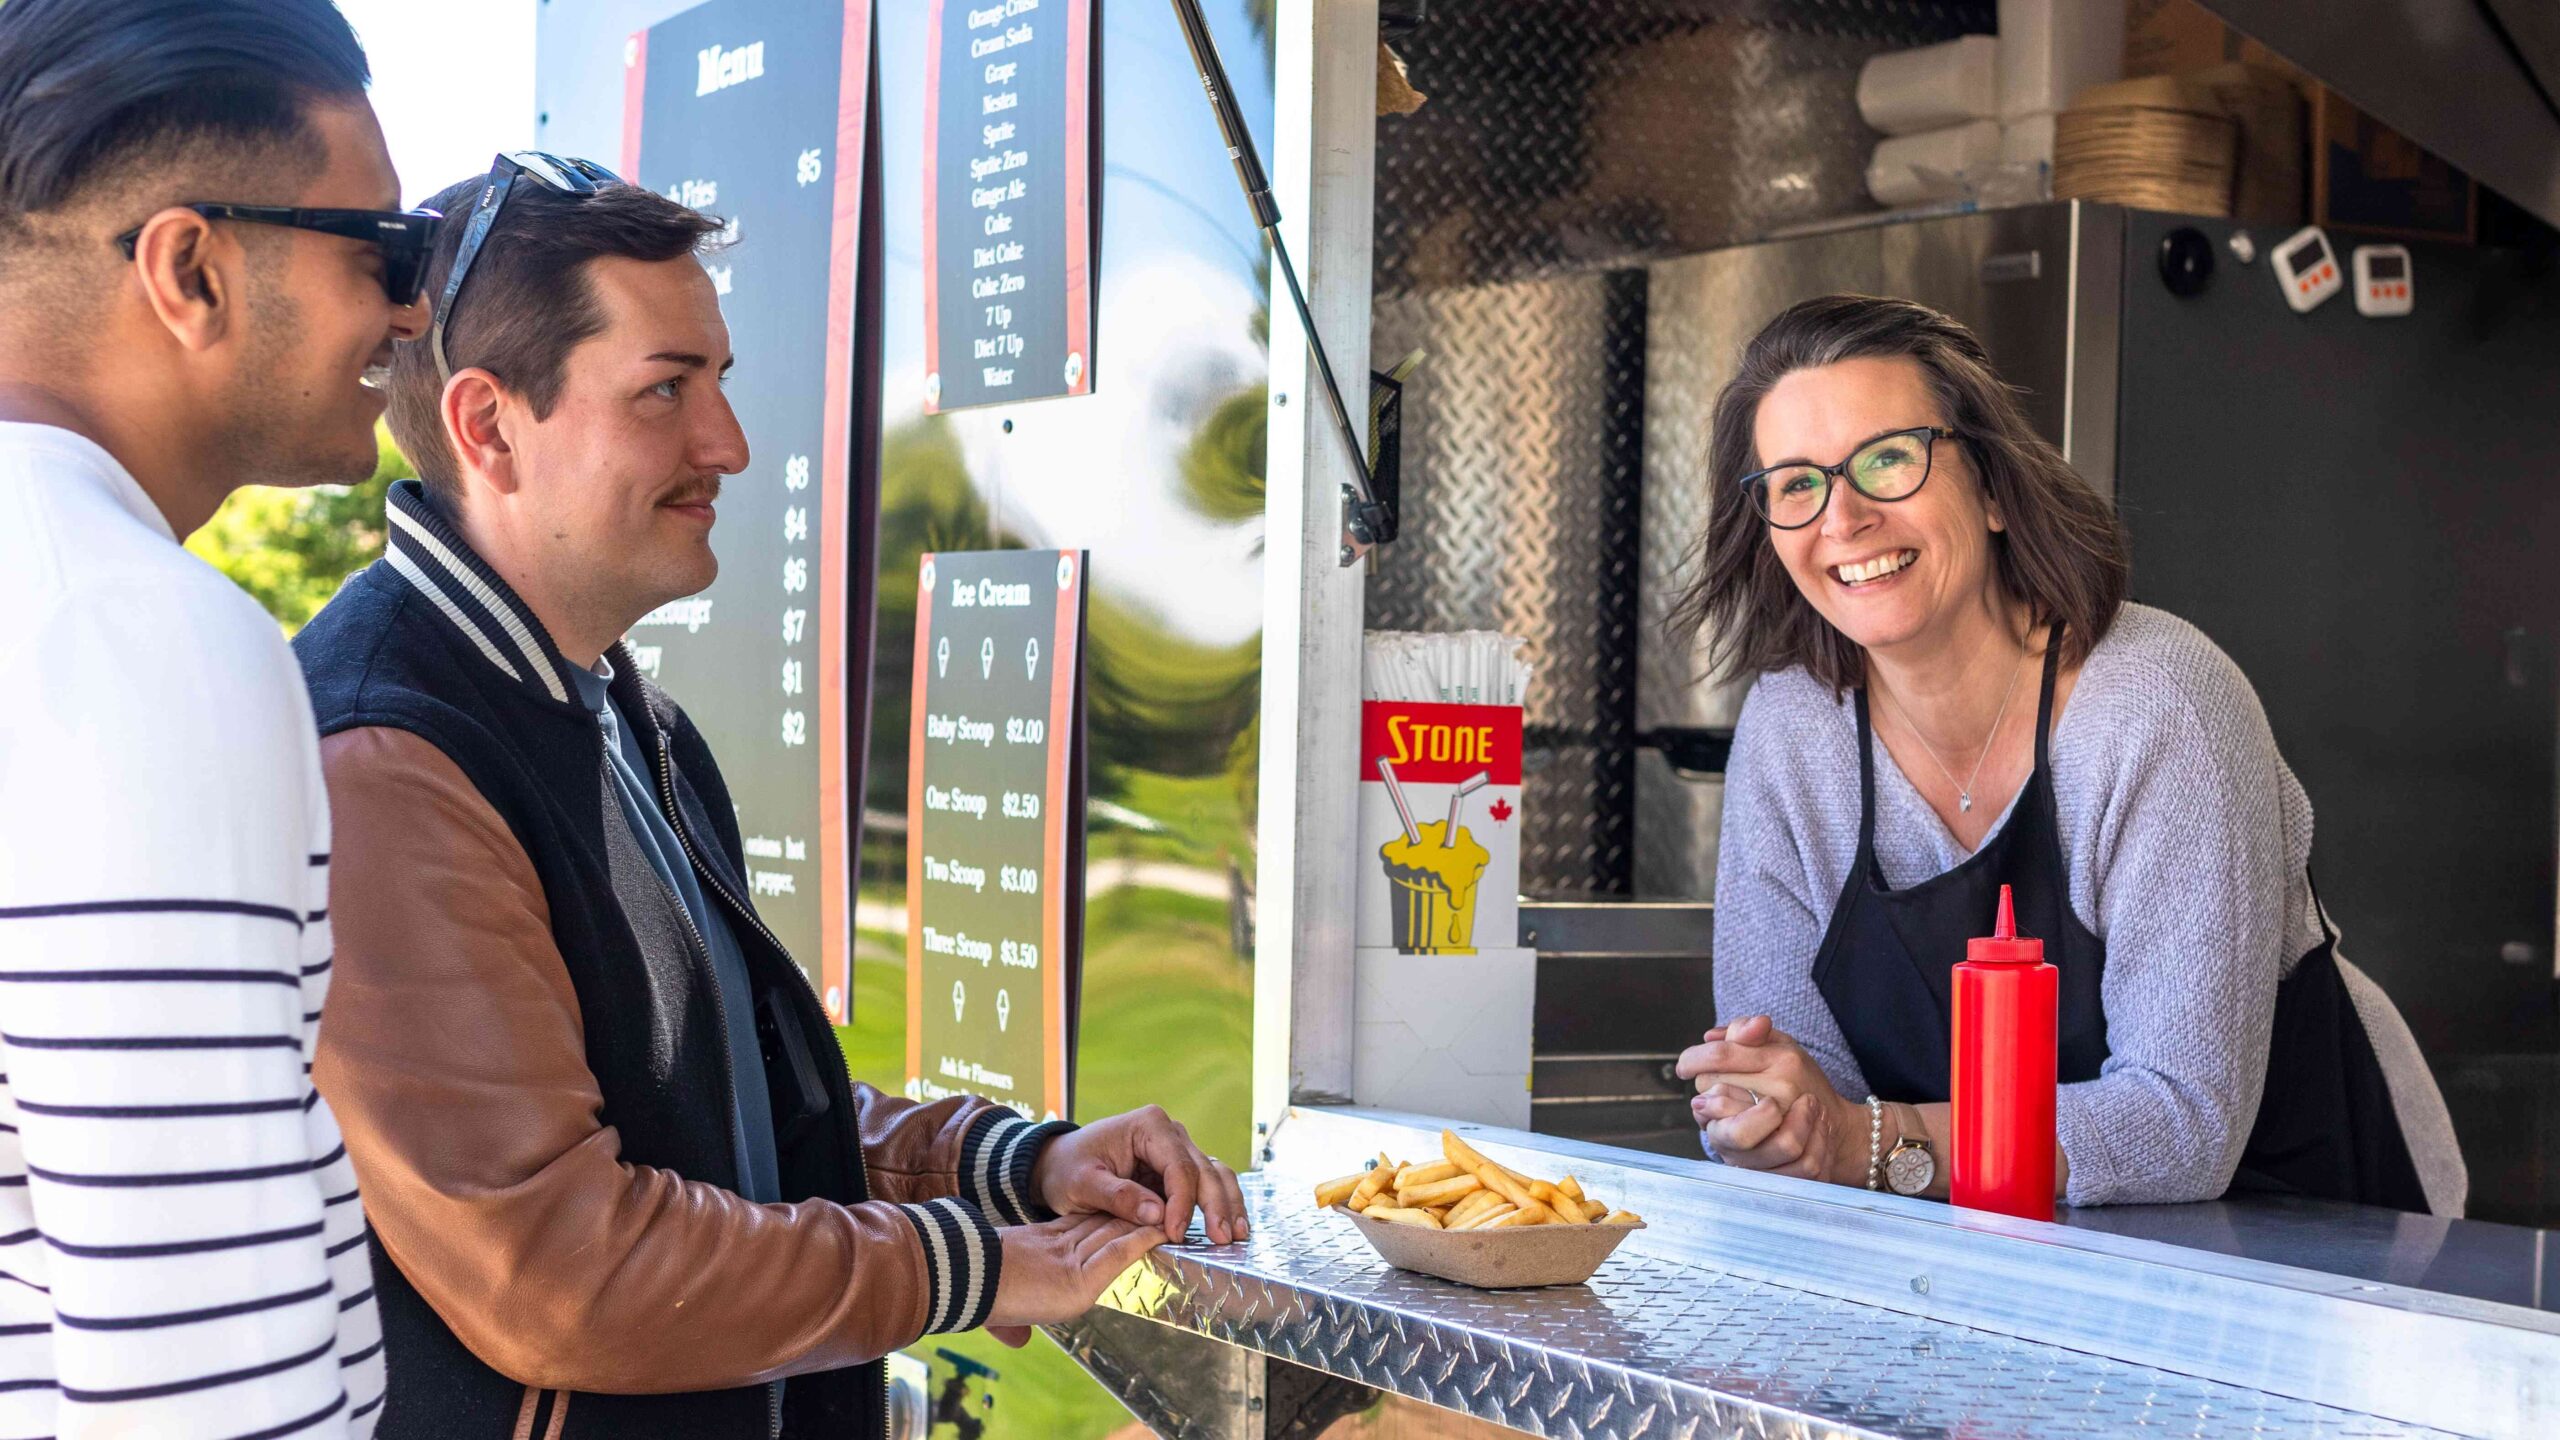 A woman smiles from a food truck service window while serving two customers.